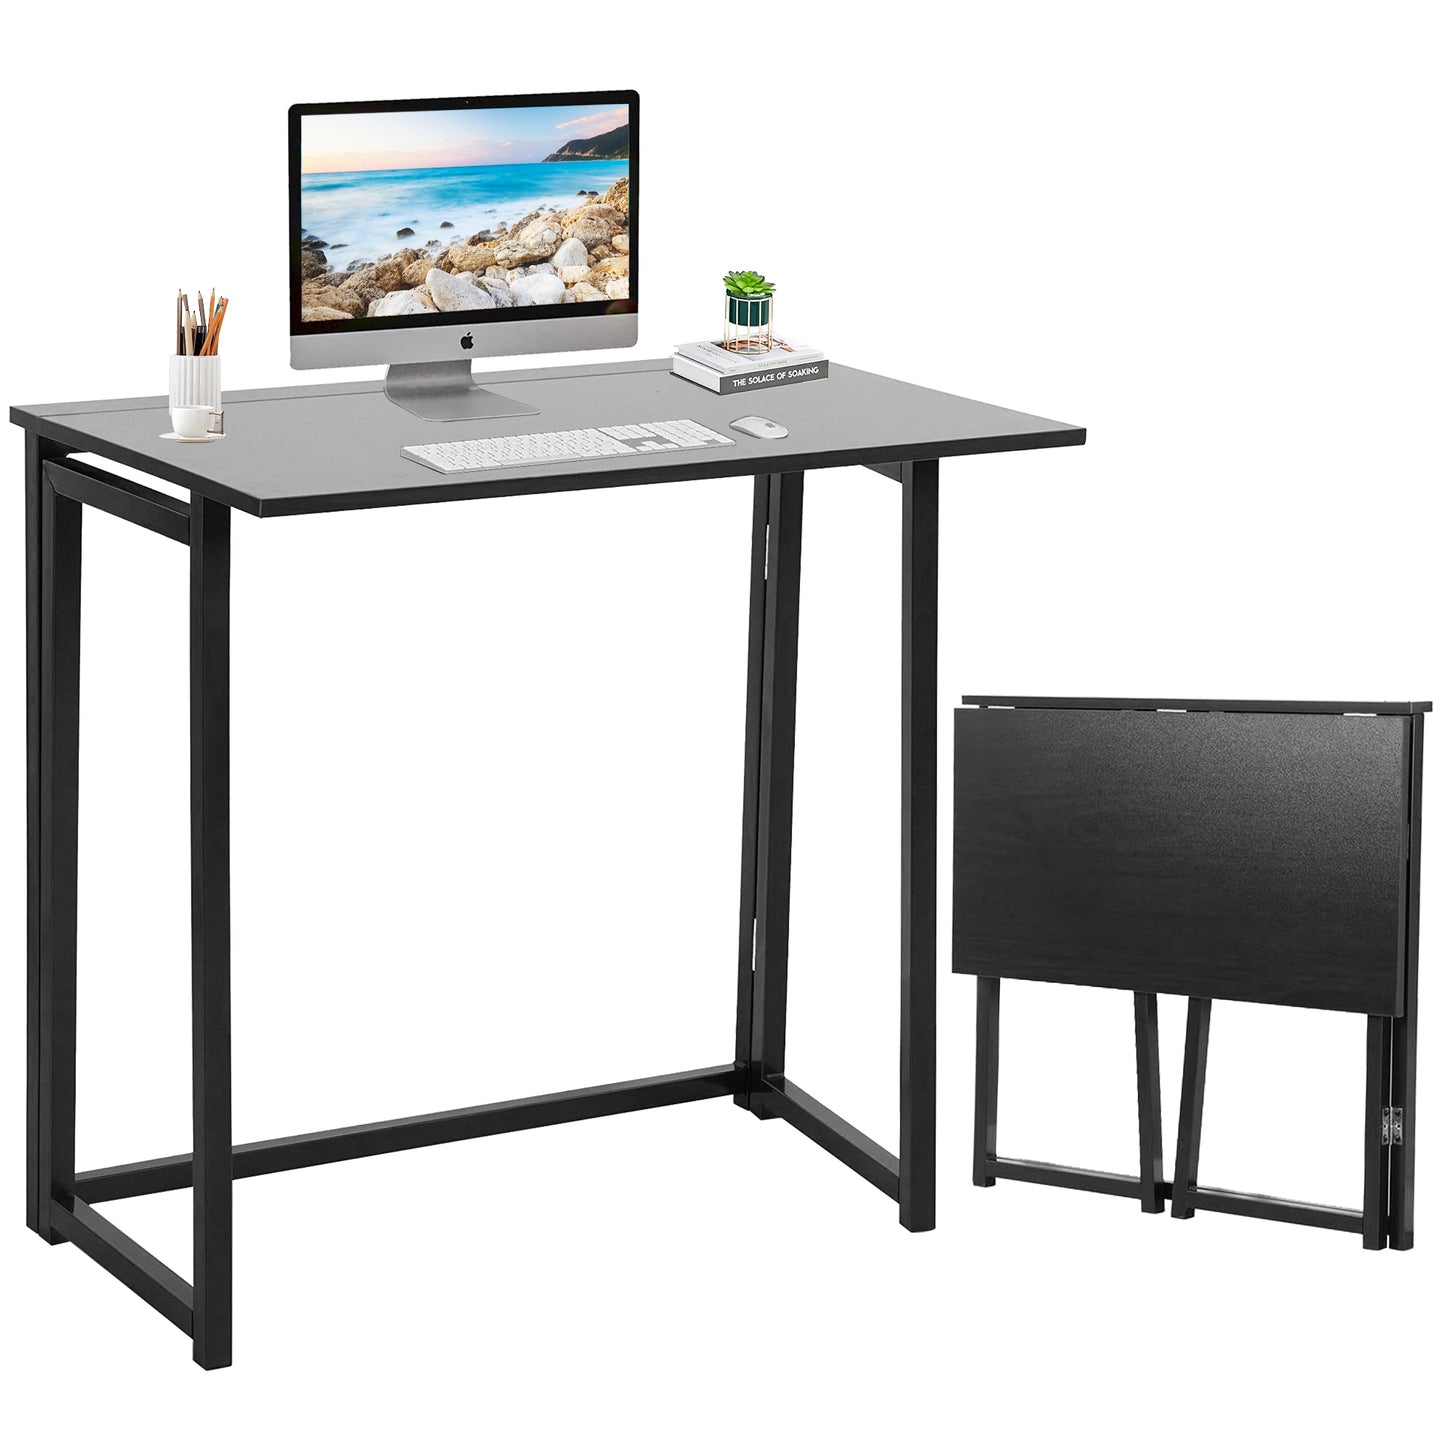 Folding Desk No-Assembly Small Computer Table Sturdy for Home Office Work